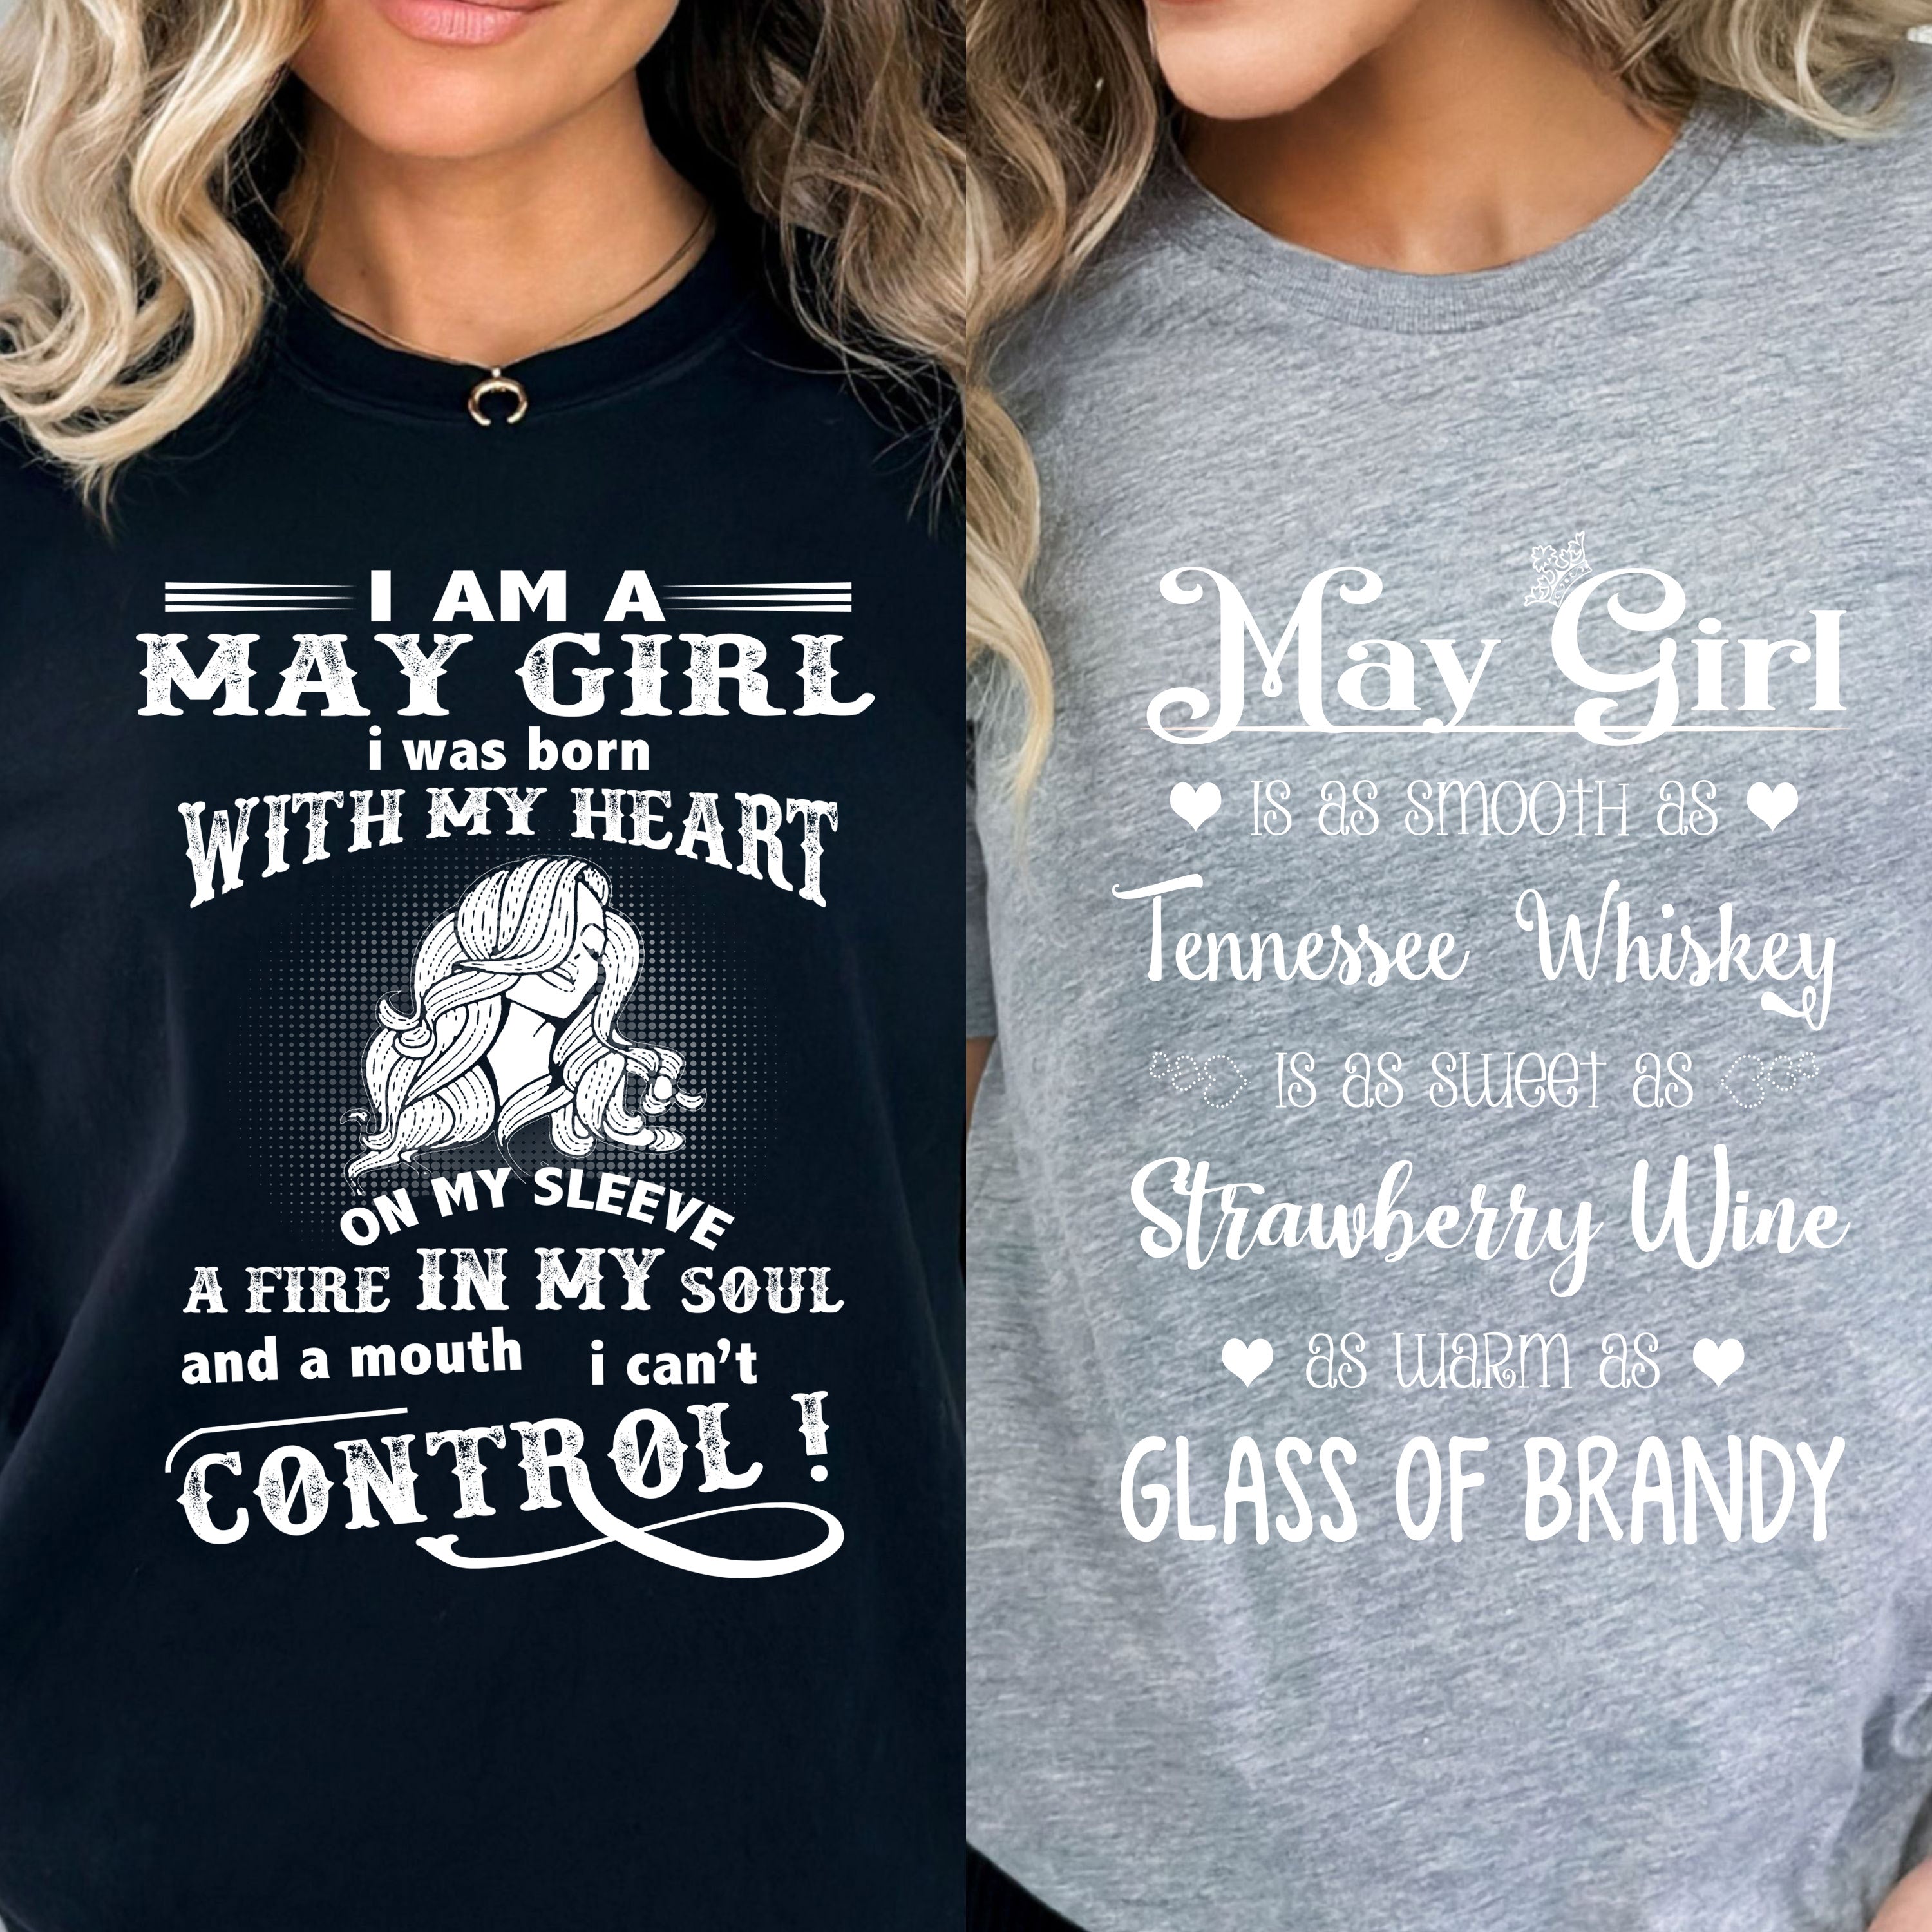 "May Whiskey + Control -Pack of 2".